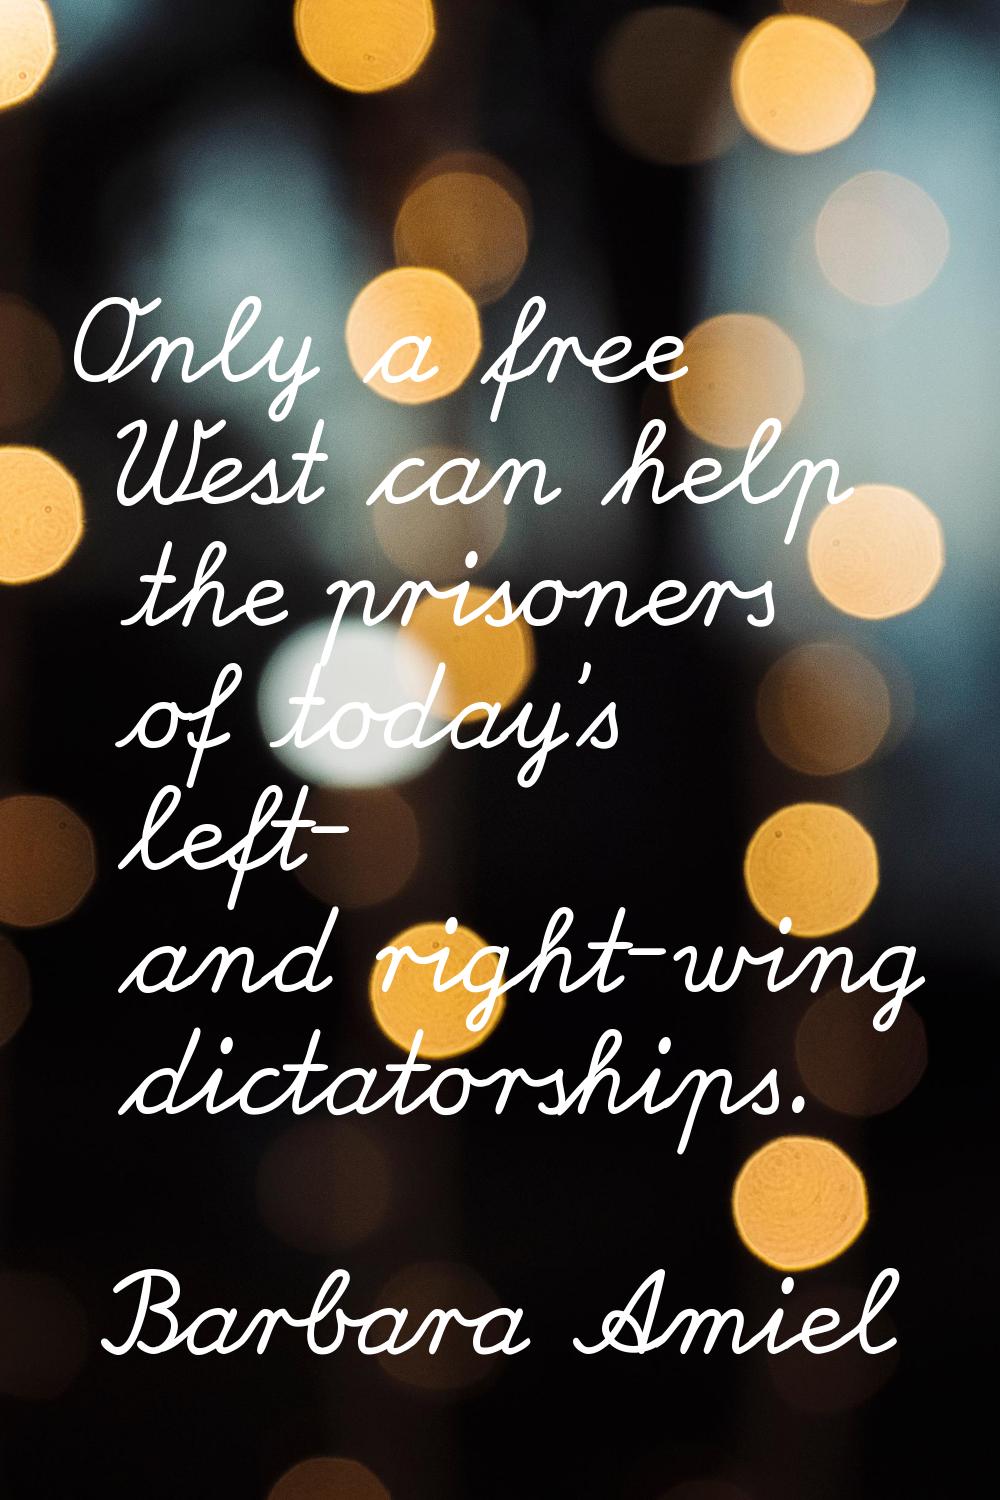 Only a free West can help the prisoners of today's left- and right-wing dictatorships.